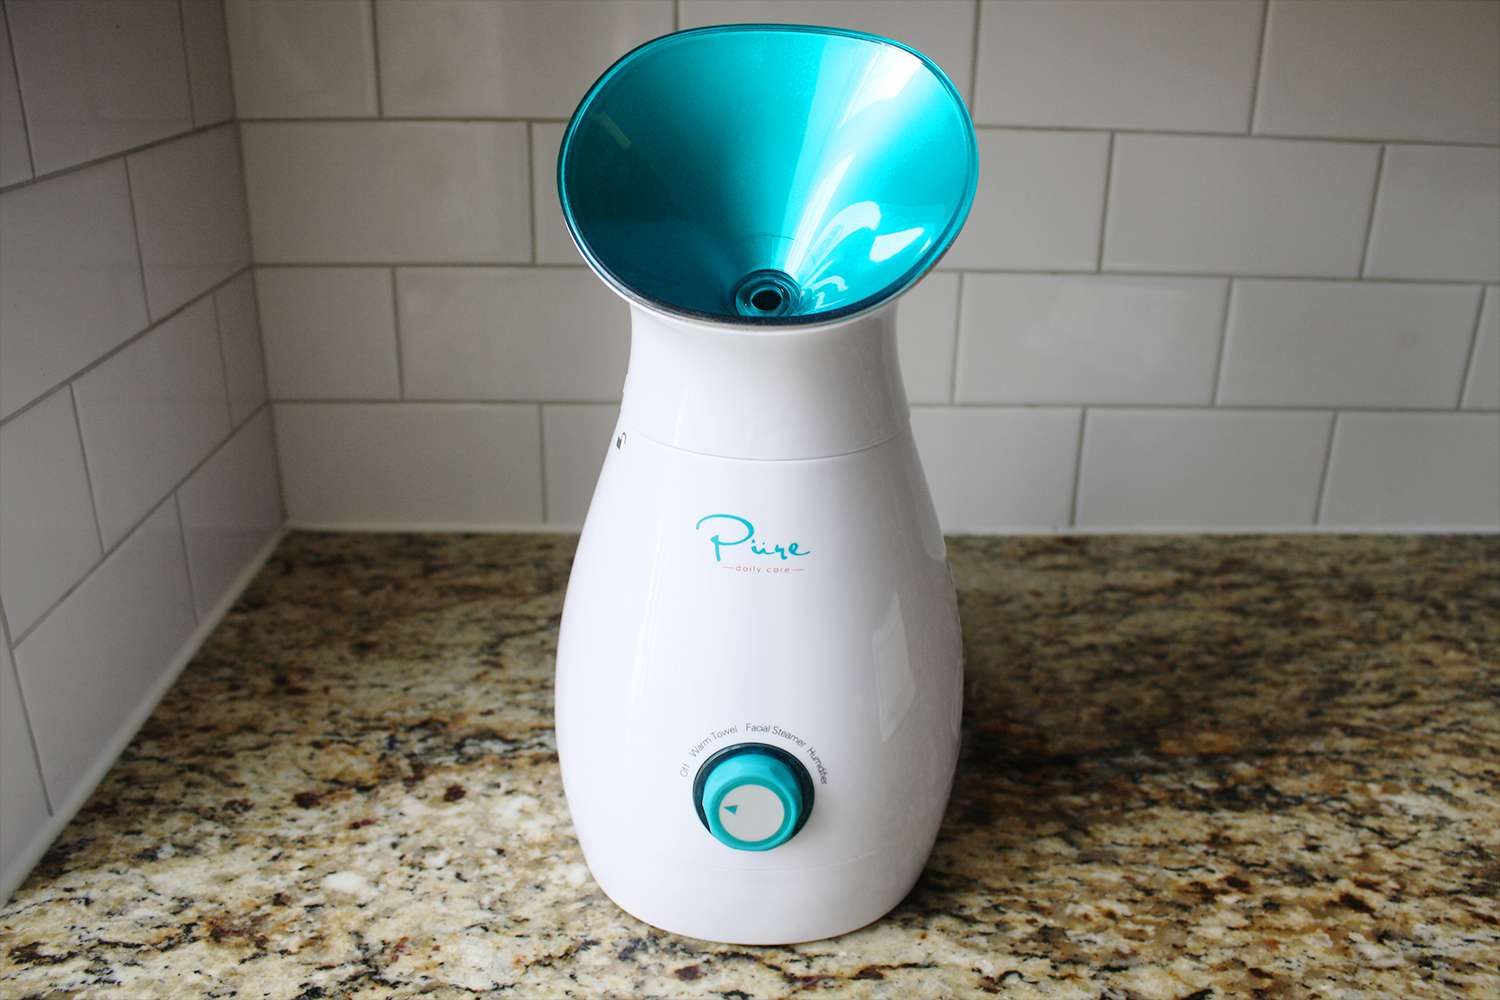 How To Clean Pure Daily Care Facial Steamer